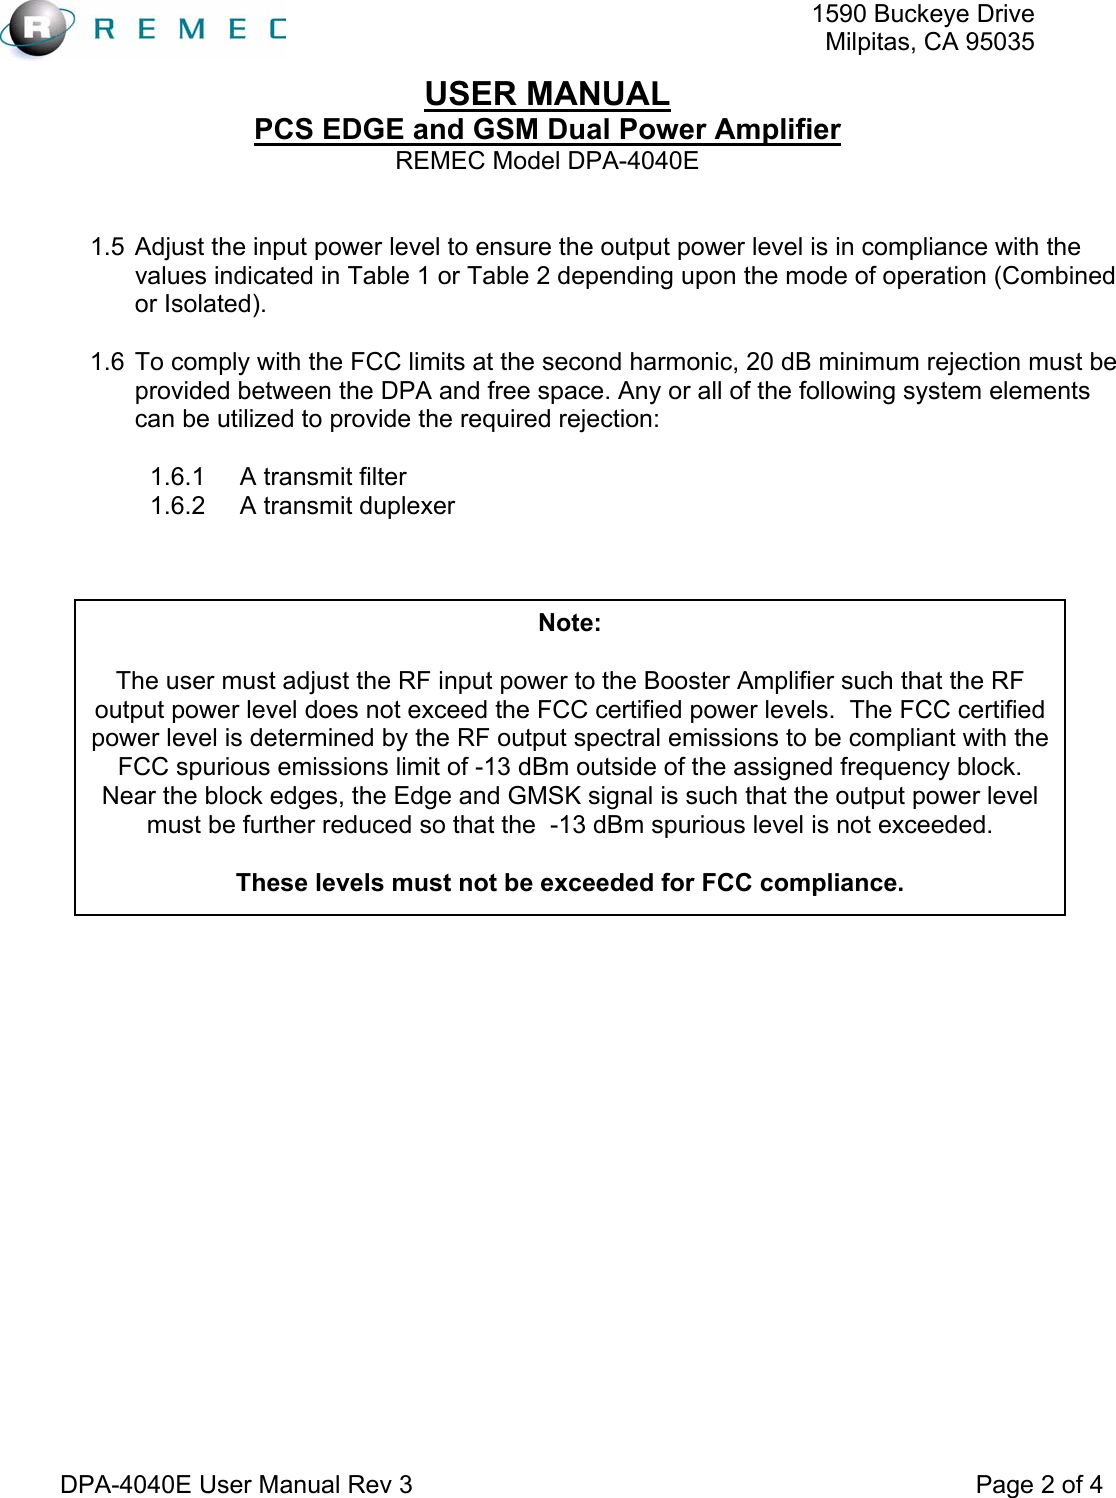   1590 Buckeye DriveMilpitas, CA 95035USER MANUAL PCS EDGE and GSM Dual Power Amplifier REMEC Model DPA-4040E  DPA-4040E User Manual Rev 3                                                                                 Page 2 of 4  1.5  Adjust the input power level to ensure the output power level is in compliance with the values indicated in Table 1 or Table 2 depending upon the mode of operation (Combined or Isolated).  1.6  To comply with the FCC limits at the second harmonic, 20 dB minimum rejection must be provided between the DPA and free space. Any or all of the following system elements can be utilized to provide the required rejection:  1.6.1 A transmit filter 1.6.2 A transmit duplexer          Note:  The user must adjust the RF input power to the Booster Amplifier such that the RF output power level does not exceed the FCC certified power levels.  The FCC certified power level is determined by the RF output spectral emissions to be compliant with the FCC spurious emissions limit of -13 dBm outside of the assigned frequency block.  Near the block edges, the Edge and GMSK signal is such that the output power level must be further reduced so that the  -13 dBm spurious level is not exceeded.  These levels must not be exceeded for FCC compliance. 